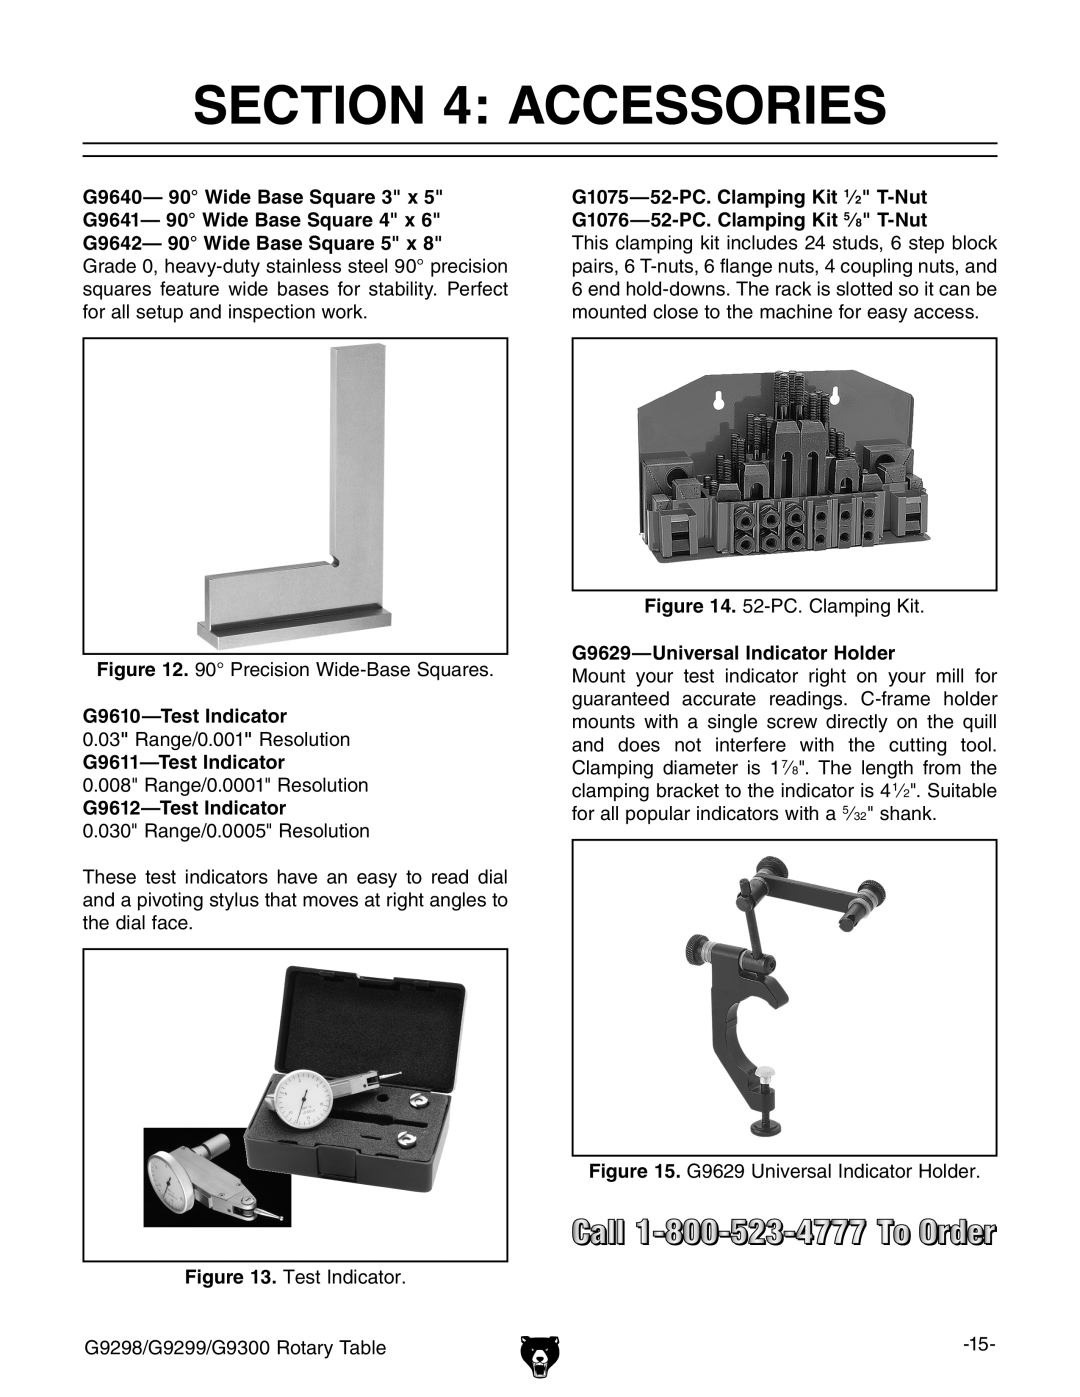 Grizzly G9298 owner manual Accessories, G9610-Test Indicator, G9611-Test Indicator, G9612-Test Indicator 